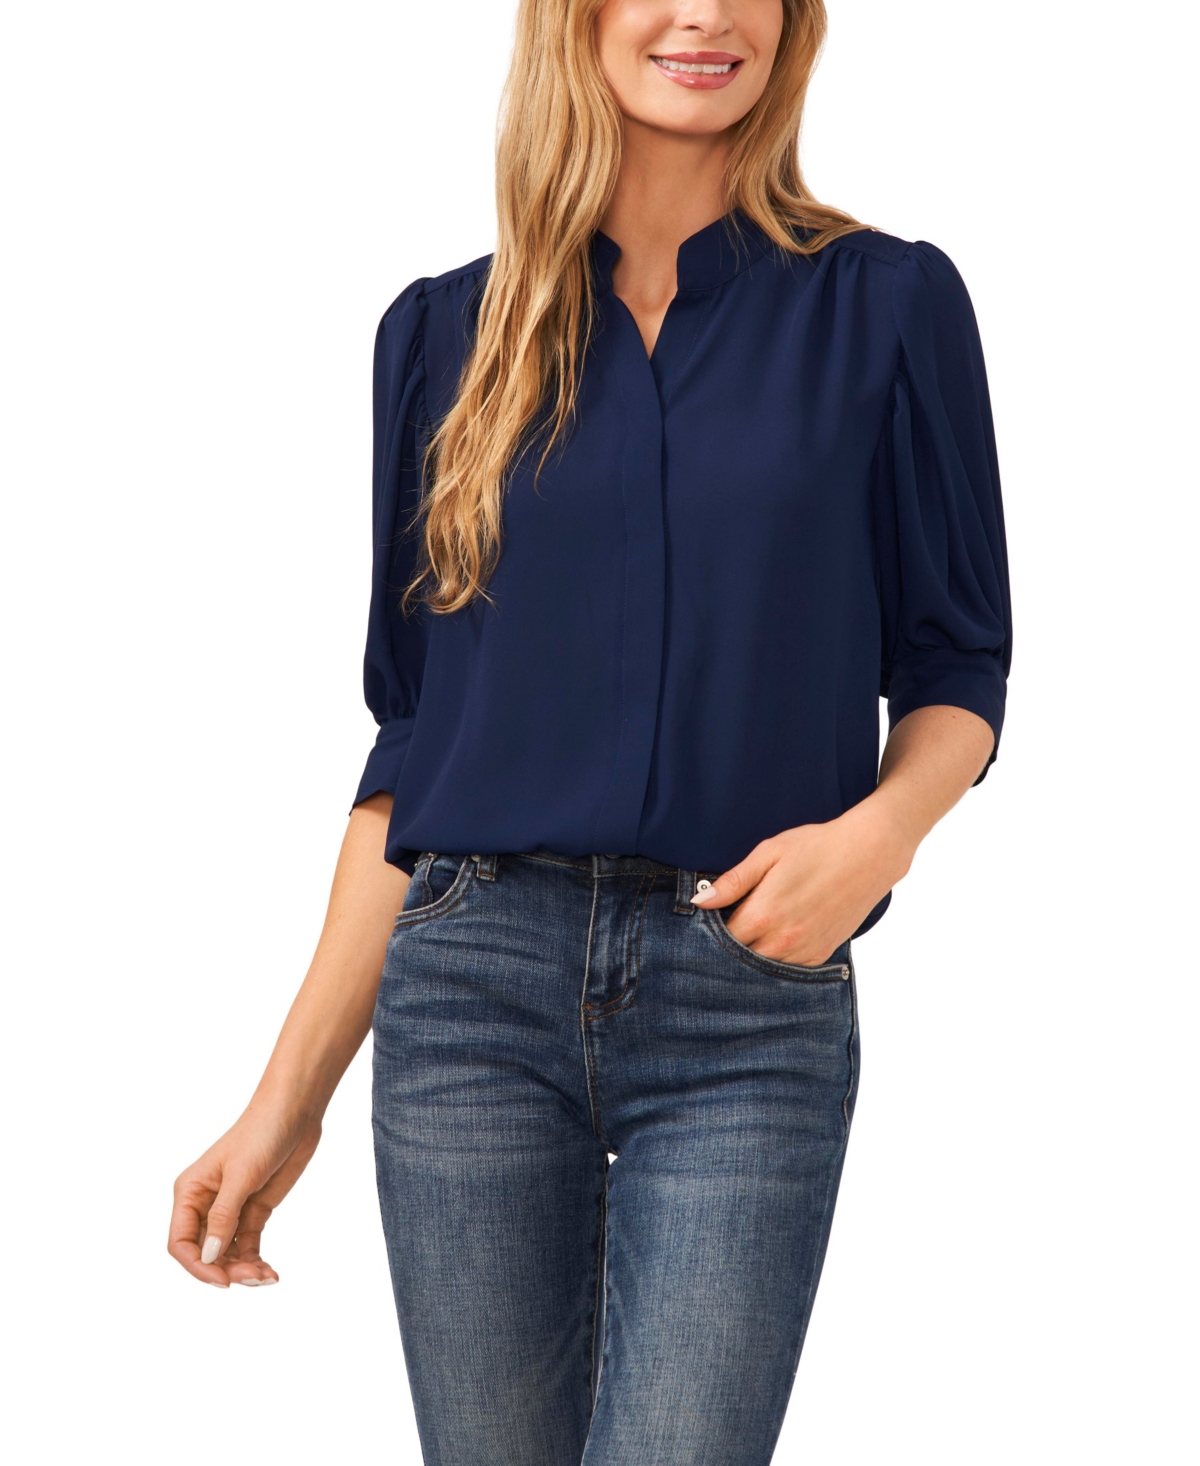 Women's Elbow Sleeve Collared Button Down Blouse - Classic Navy